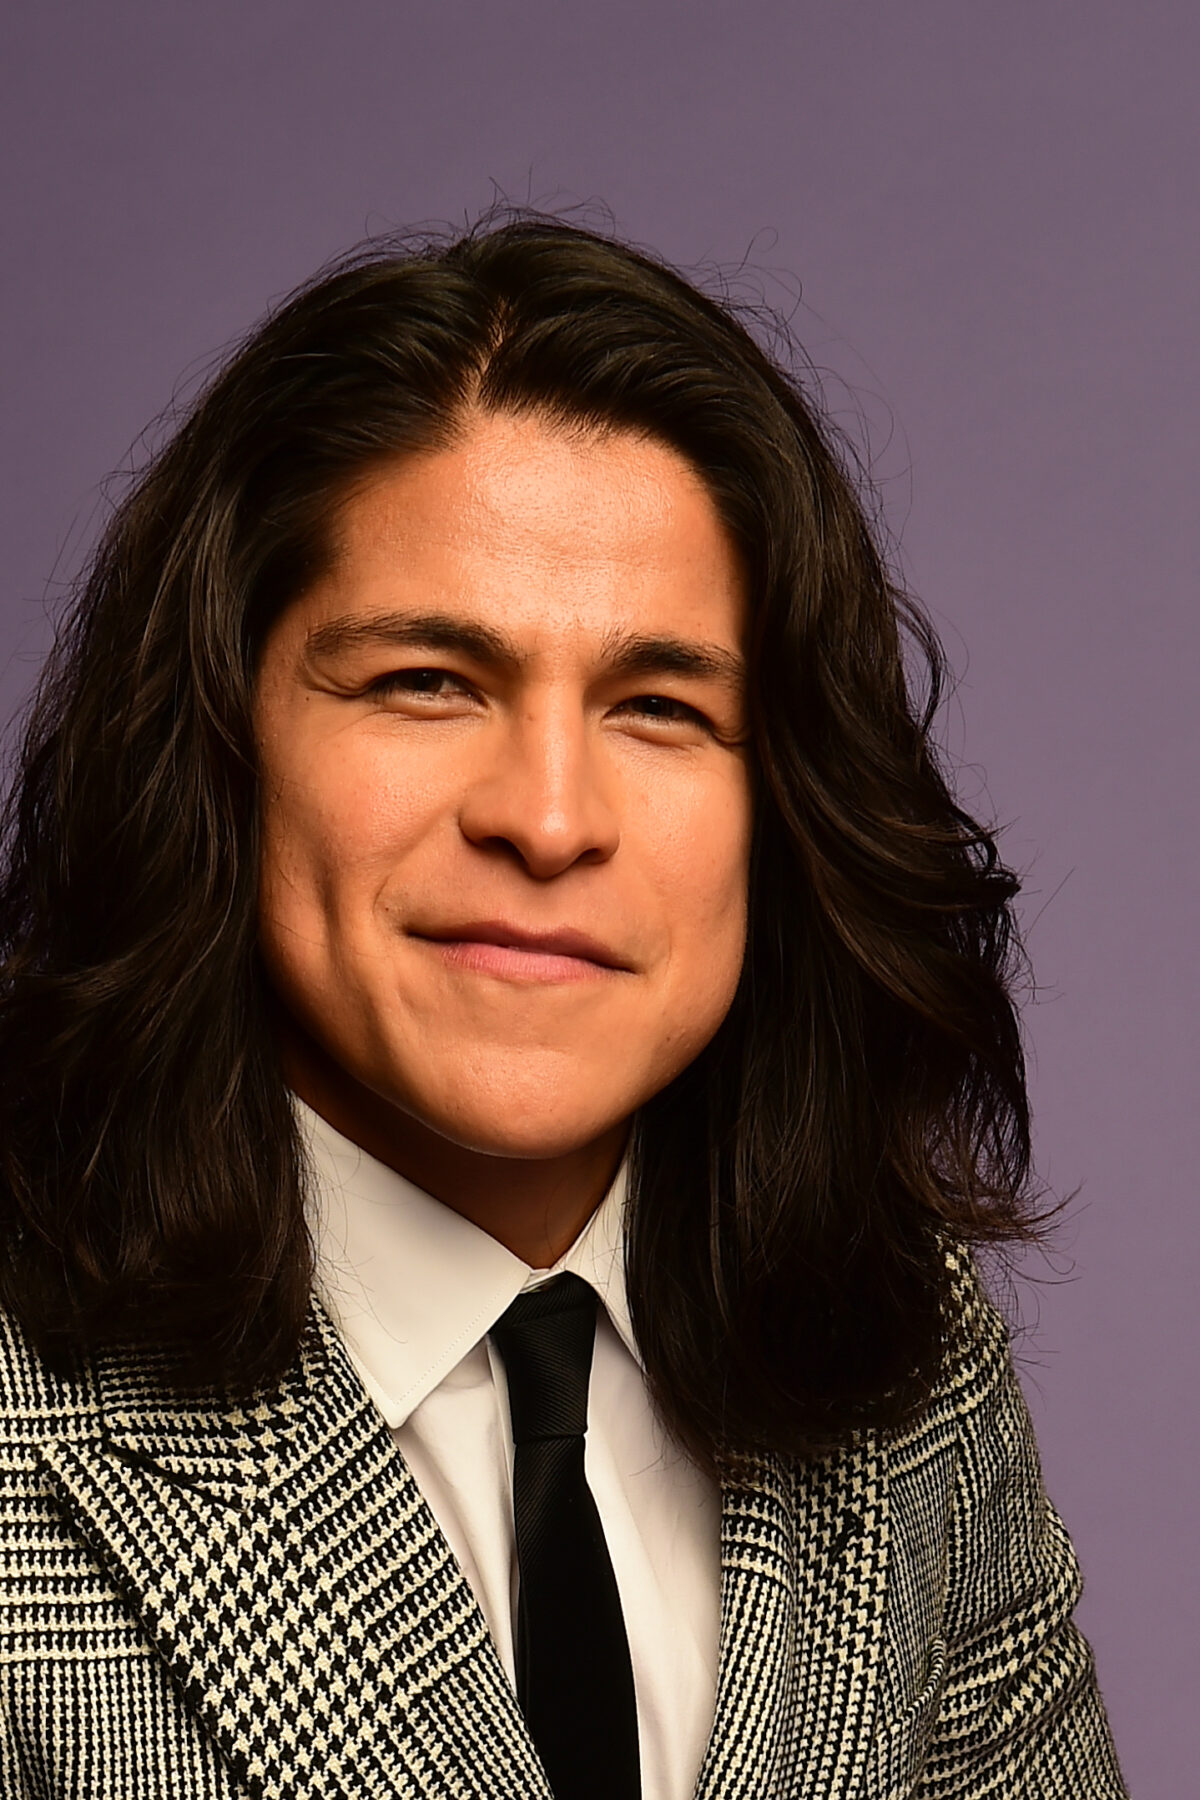 LOS ANGELES, CALIFORNIA - NOVEMBER 13: Cristo Fernández poses in the IMDb exclusive portrait studio at the Critics Choice Association 2nd Annual Celebration of Latino Cinema & Television at Fairmont Century Plaza on November 13, 2022 in Los Angeles, California. (Photo by Vivien Killilea/Getty Images for IMDb)